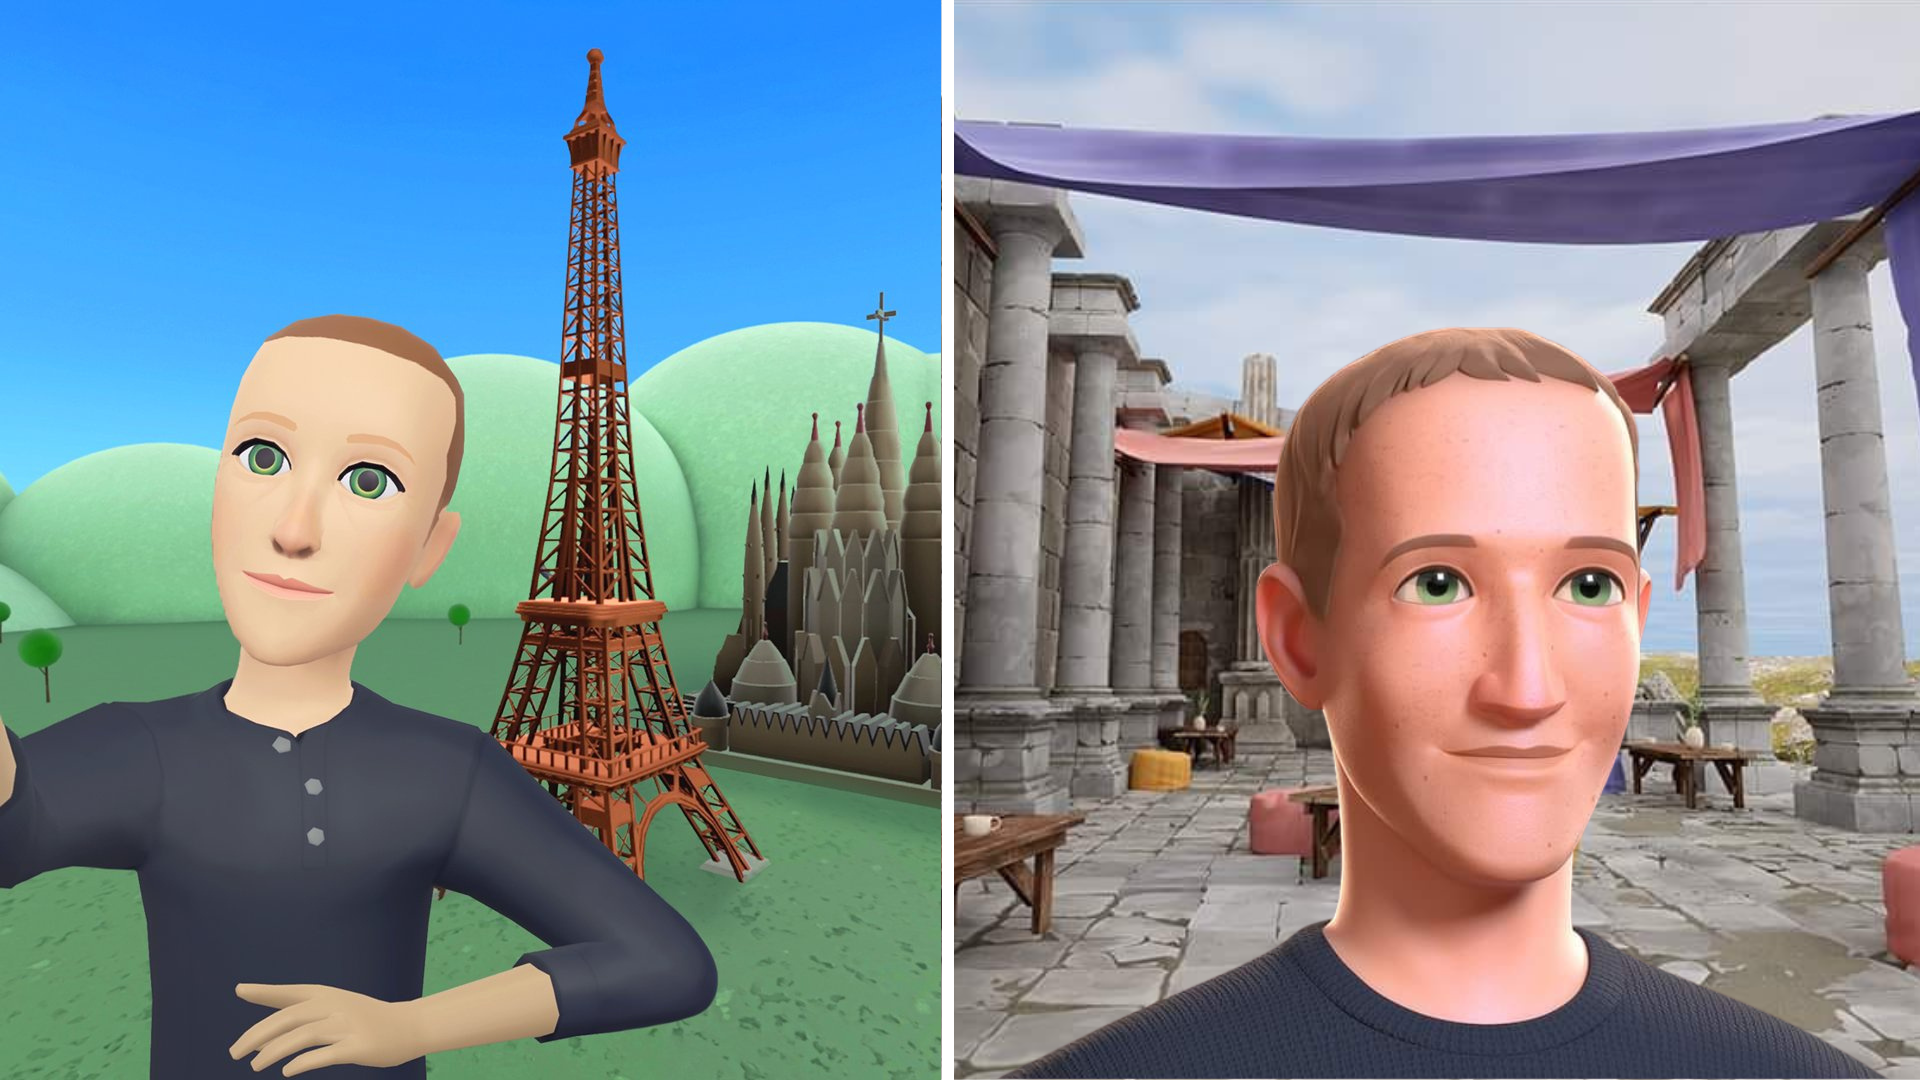 A composite of two photos: On the left, Zuckerberg’s dead-eyed selfie. On the right, a “yassified” version of him that looks more like an expensive Pixar character can be seen from the shoulders up. Behind. him is a gray expanse of Roman-esque ruins.